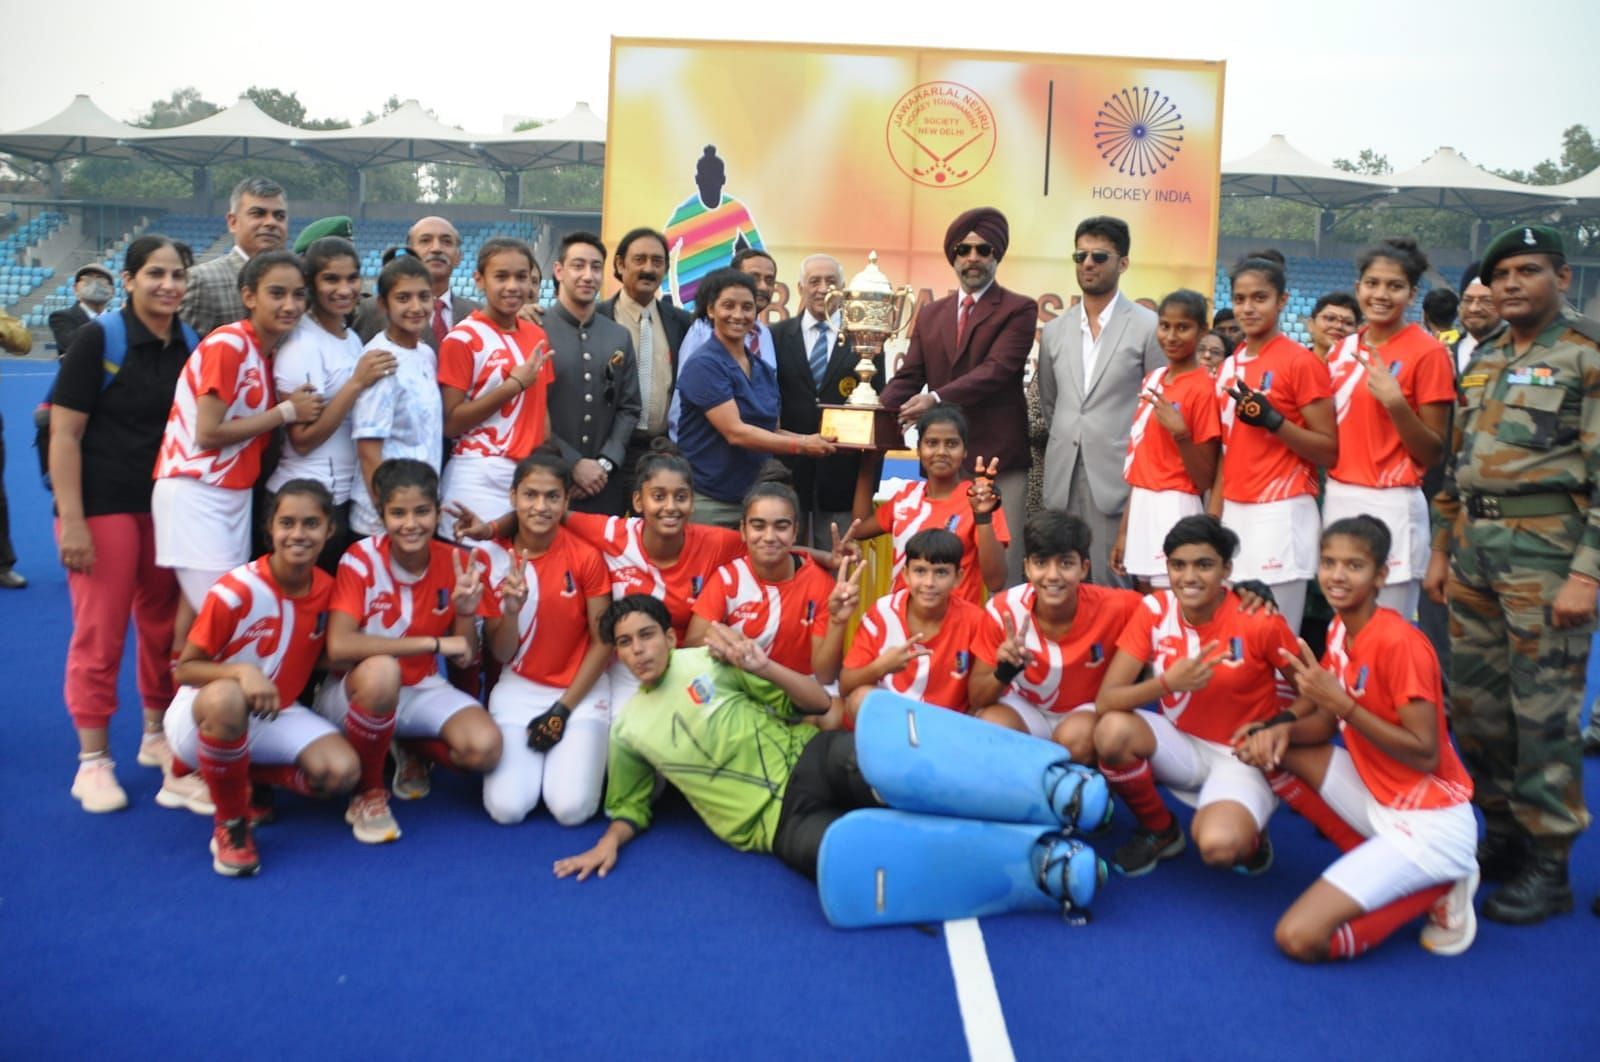 Haryana&rsquo;s Directorate General National Cadet Corps (NCC) team won INR 1.5 lacs (Photo credit - Nehru hockey)